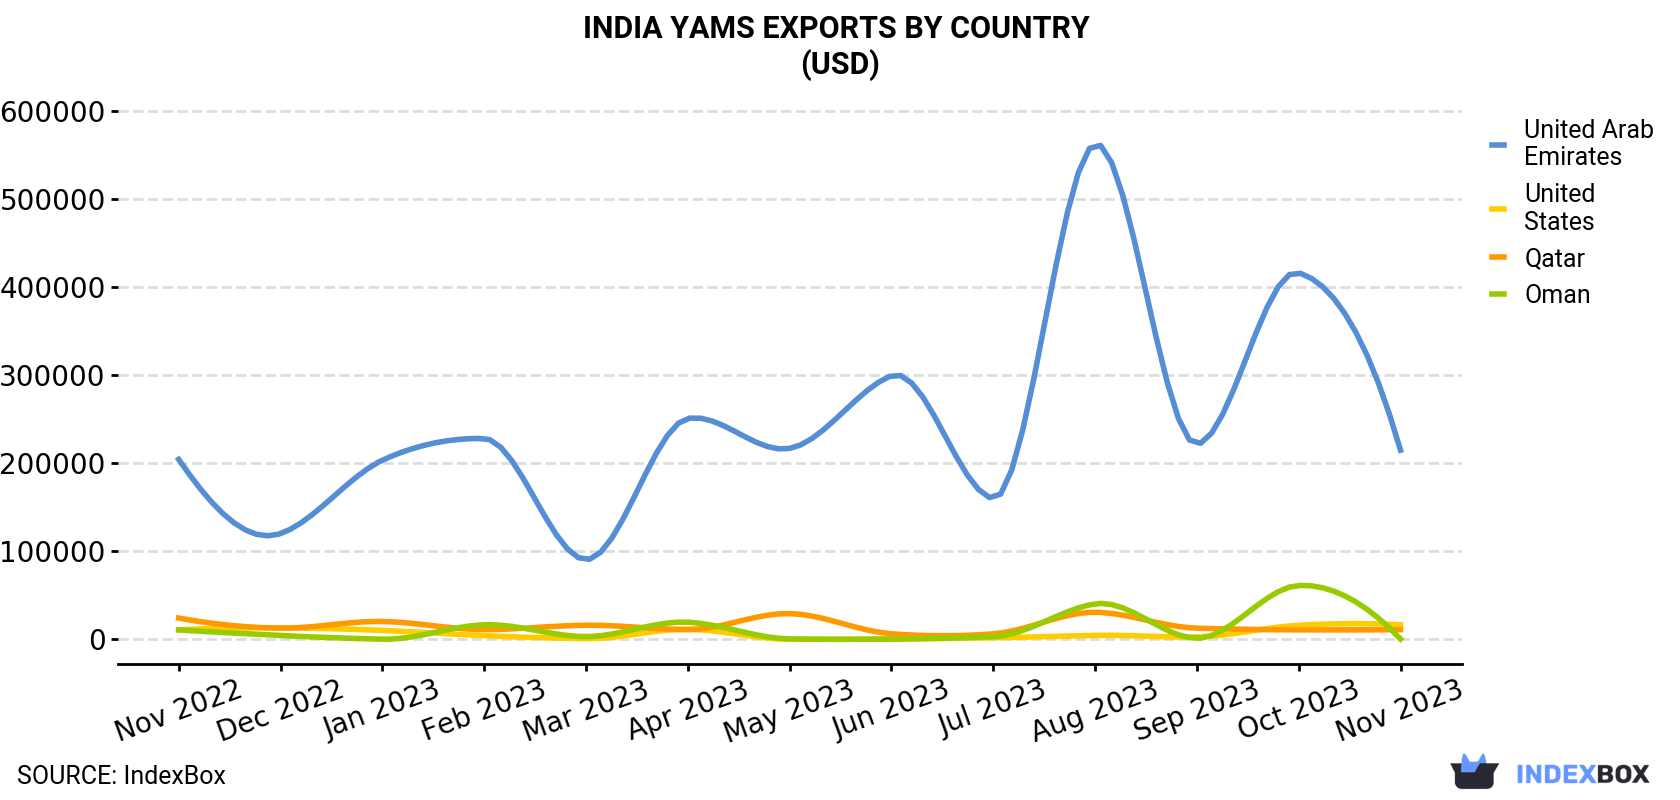 India Yams Exports By Country (USD)